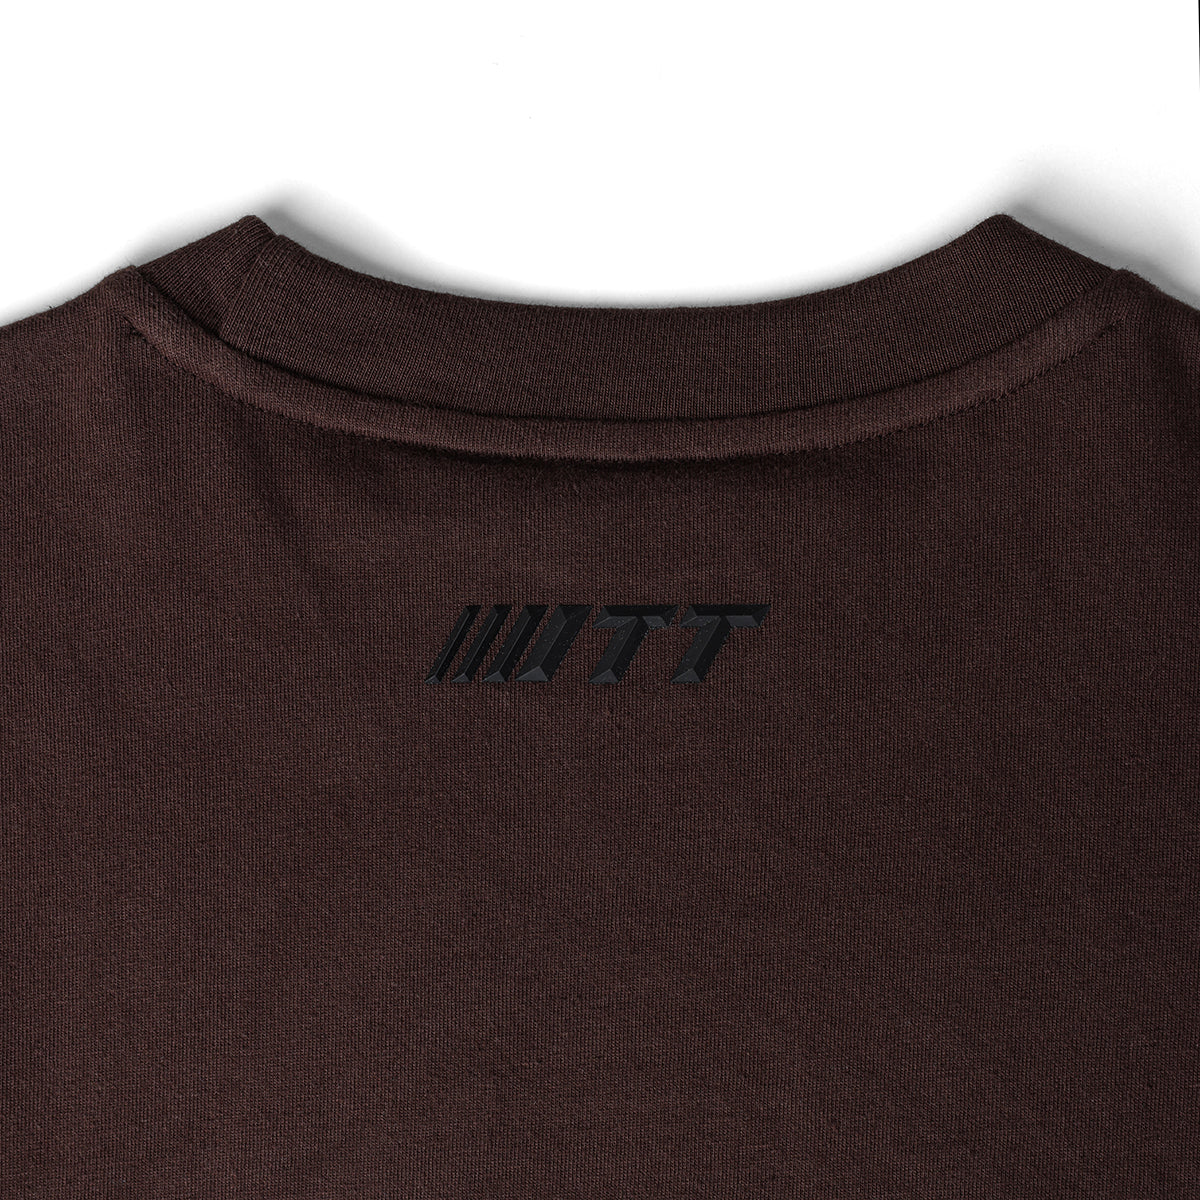 Close up image of Turbo Threads Coffee Box Fit Tee featuring a small black Turbo Threads logo near the collar